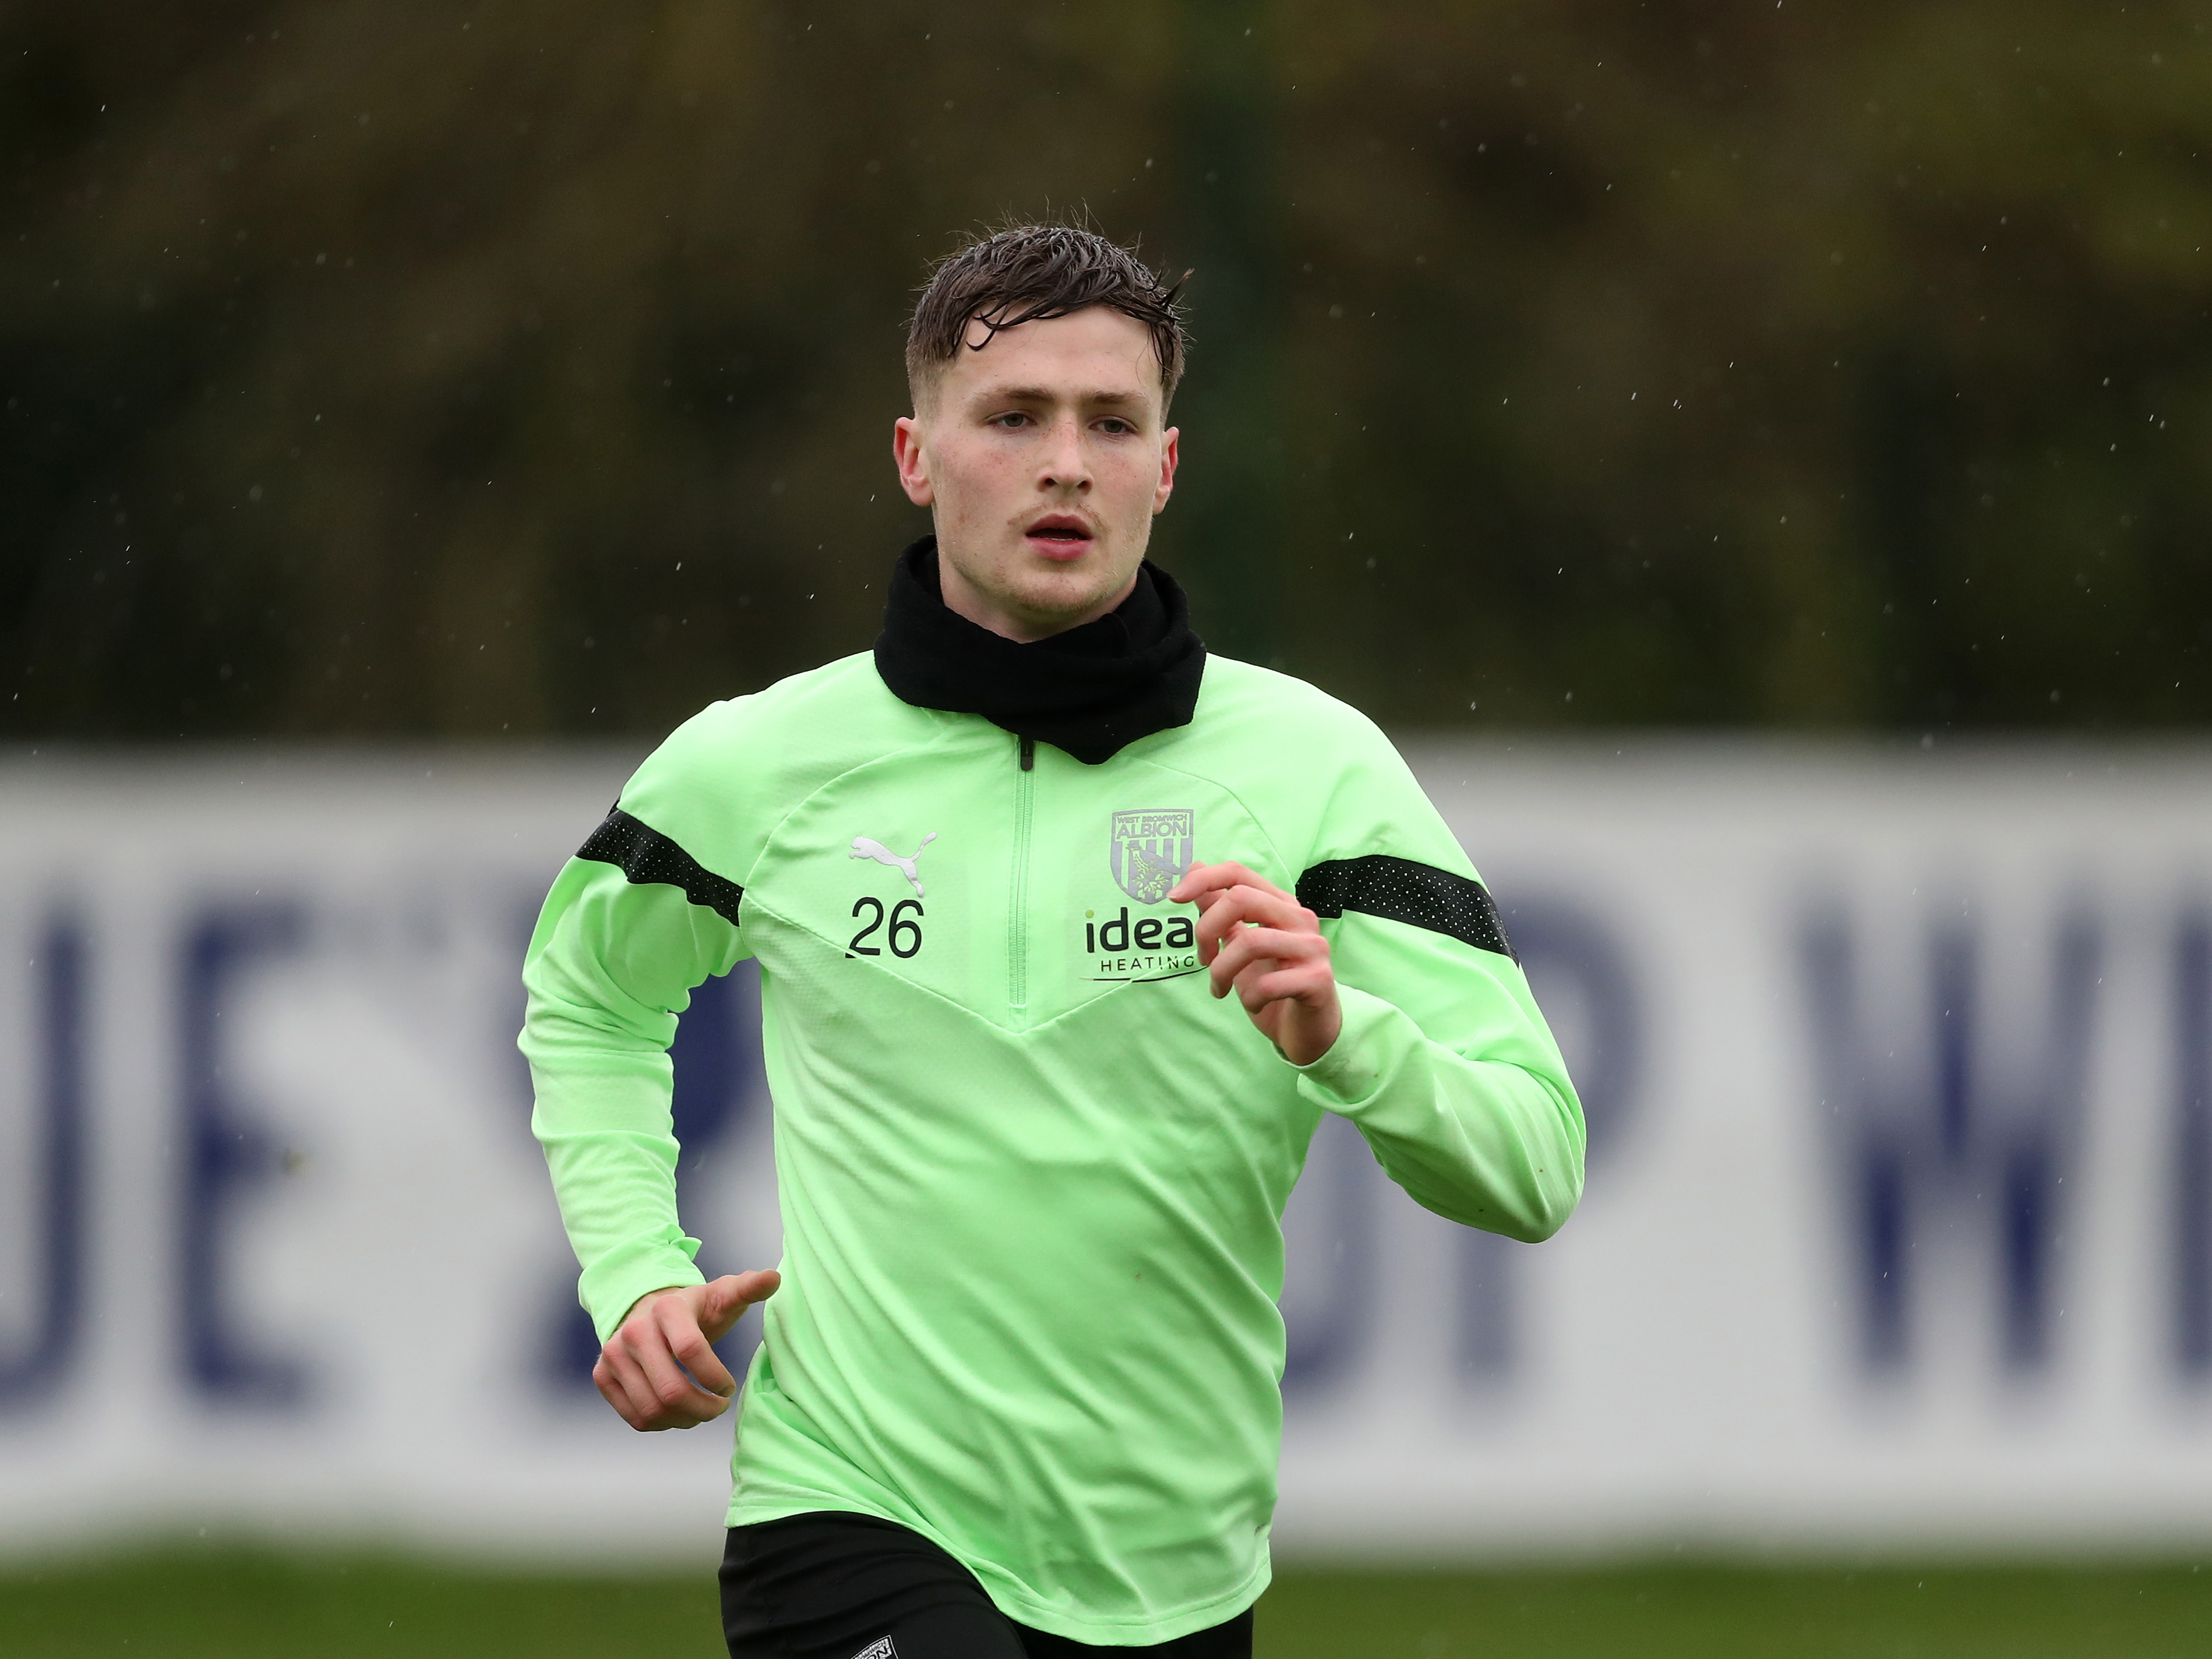 Zac Ashworth runs during Albion's first team training session at their Walsall training ground